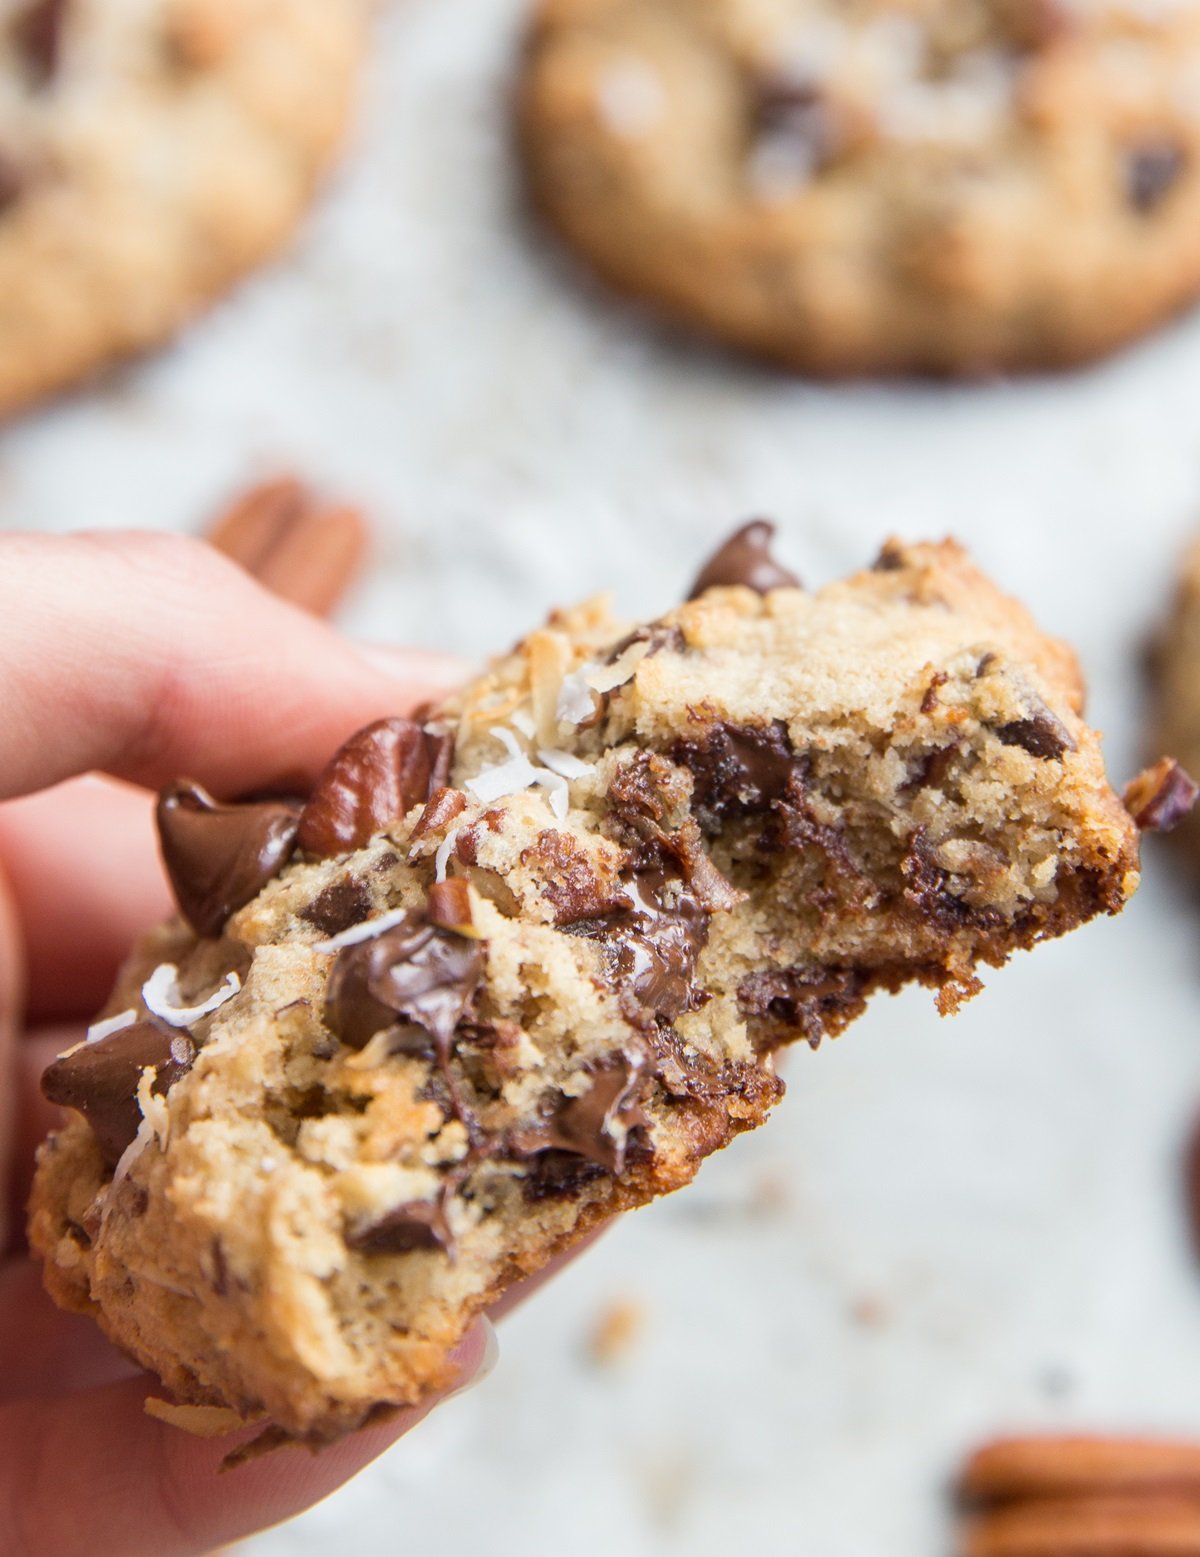 Keto Cowboy Cookies - grain-free, sugar-free keto chocolate chip cookies with pecans, shredded coconut, and more! This low-carb dessert recipe is insanely gooey and delicious!